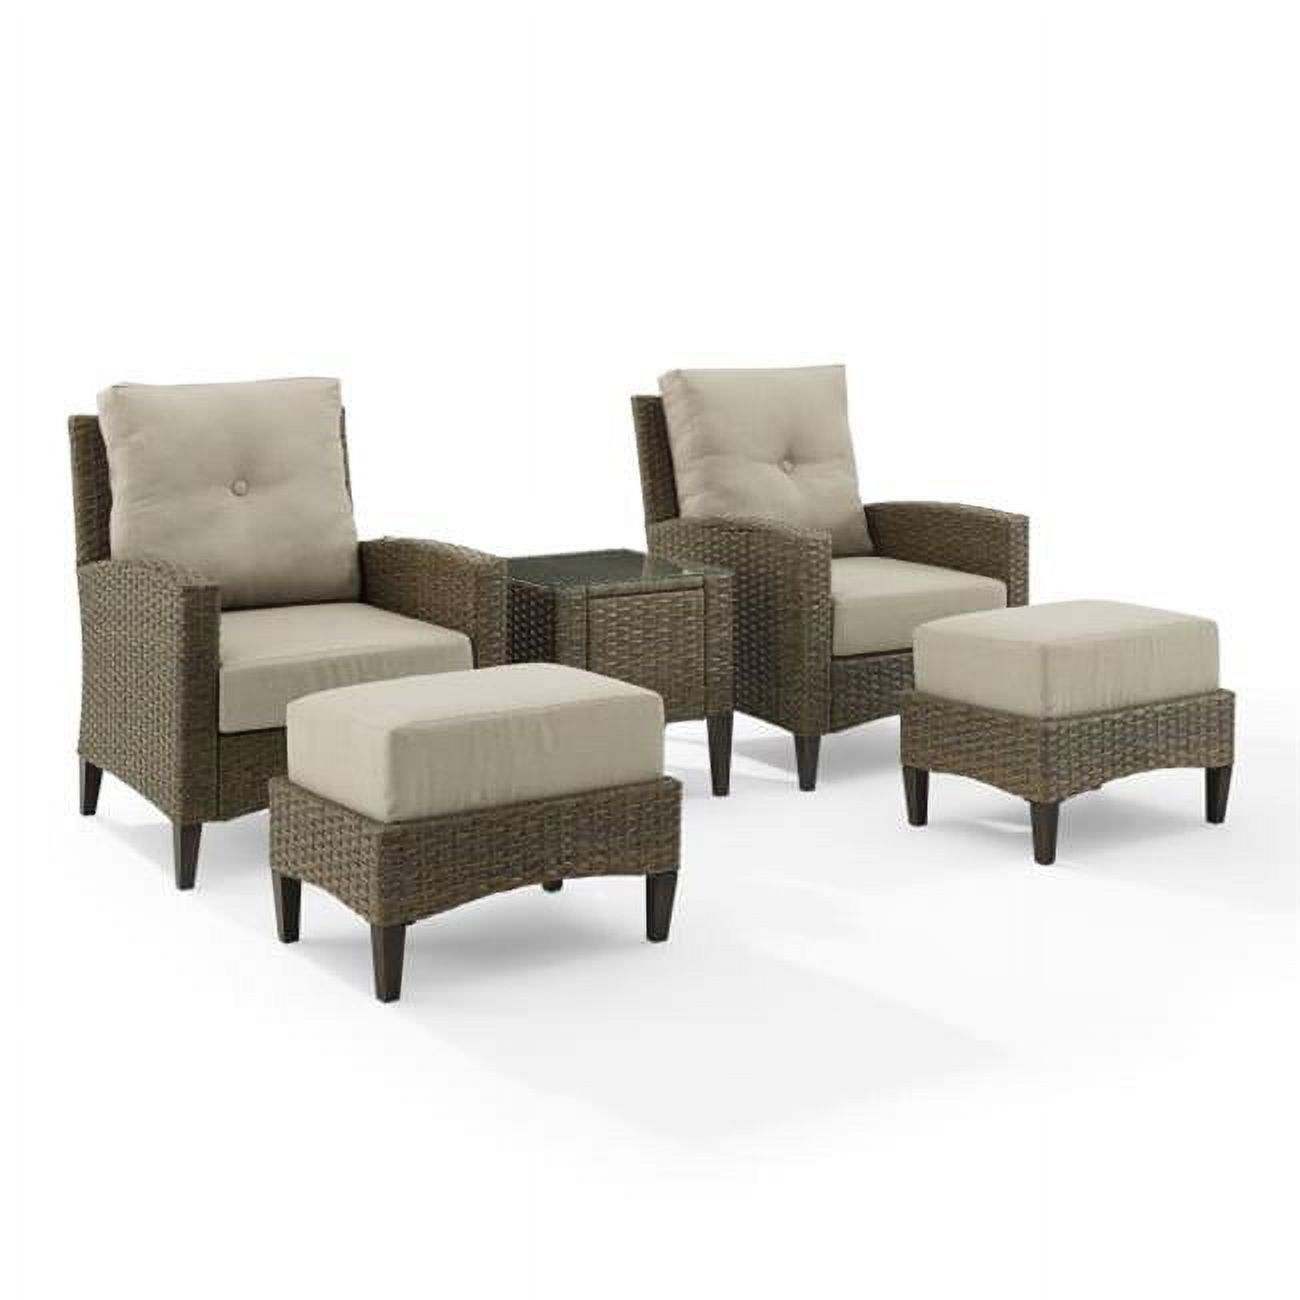 93 x 65 x 37.50 in. Rockport Outdoor Wicker High Back Chair Set - Side Table, 2 Armchairs & 2 Ottomans, Oatmeal & Light Brown - 5 Piece - image 1 of 1